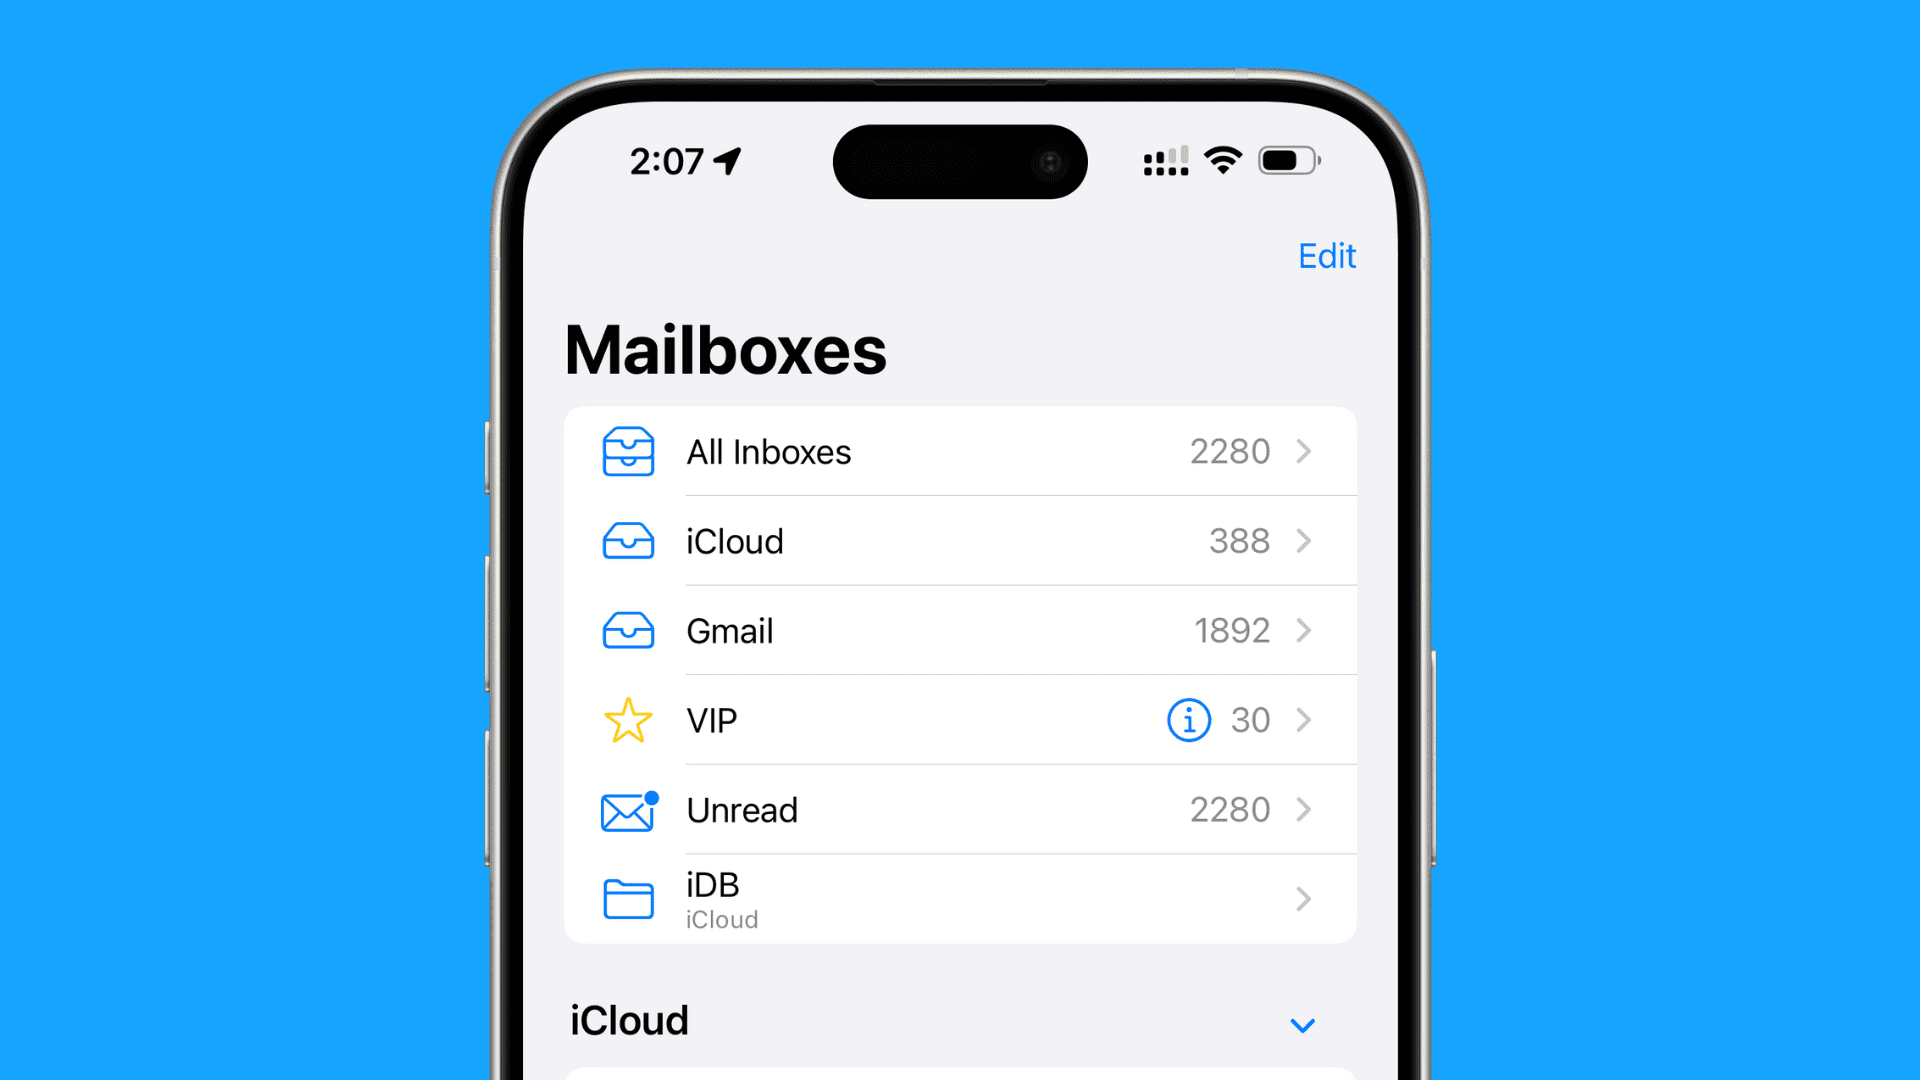 40+ tips for the Mail app on your iPhone, iPad, and Mac